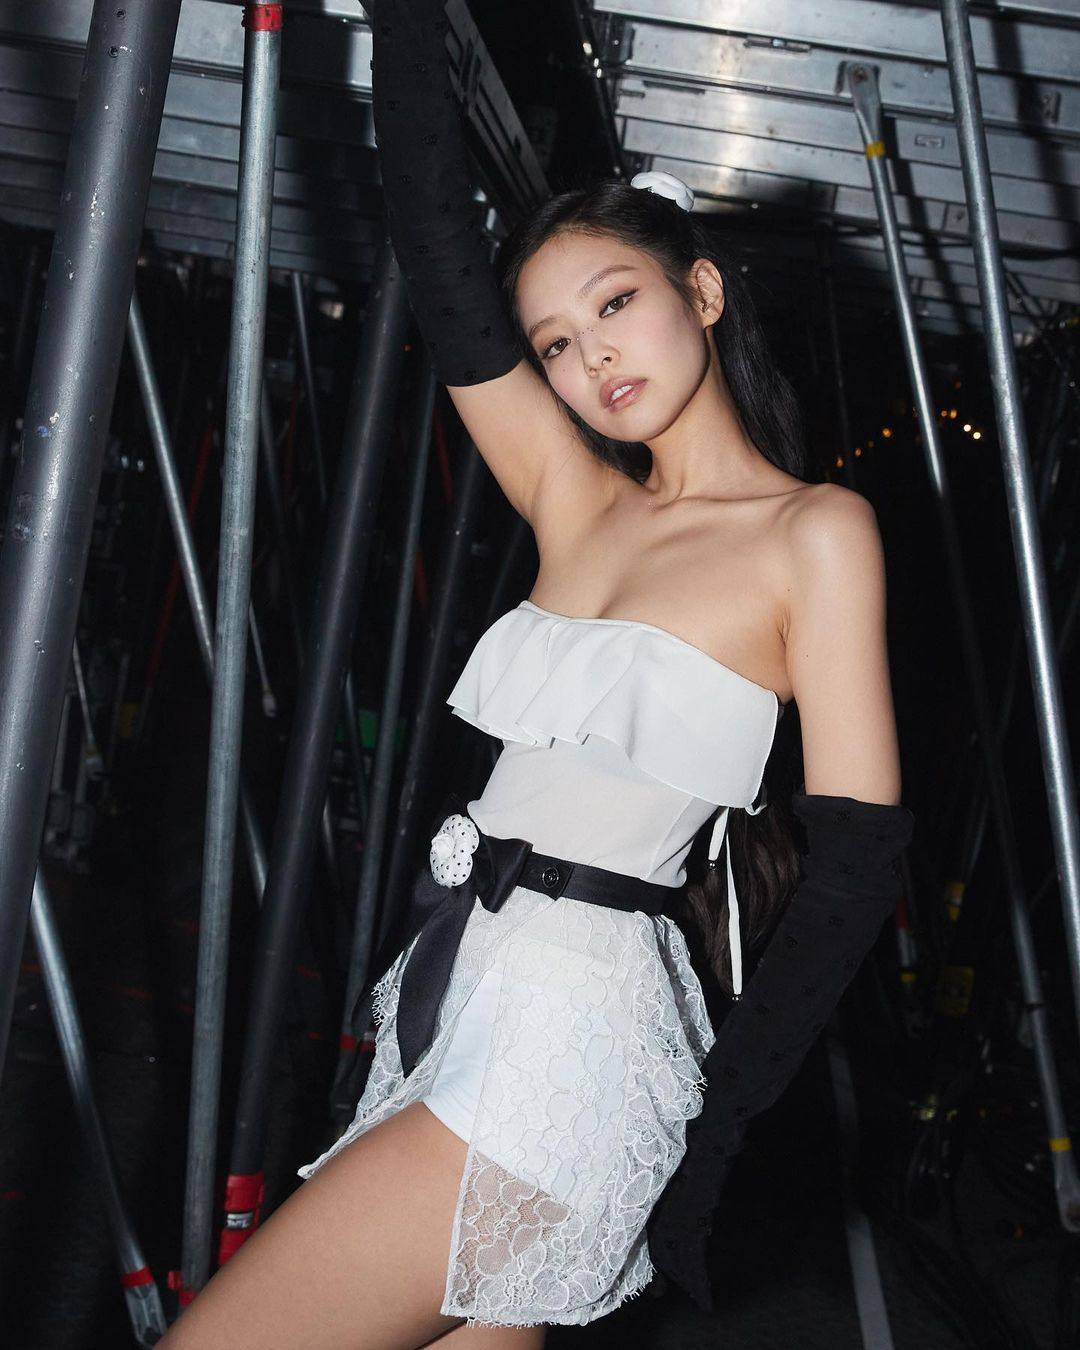 Blackpink’s Jennie may be known as the “Human Chanel”, but she also reps a variety of other luxury brands from her wardrobe. Photo: @jennierubyjane/Instagram